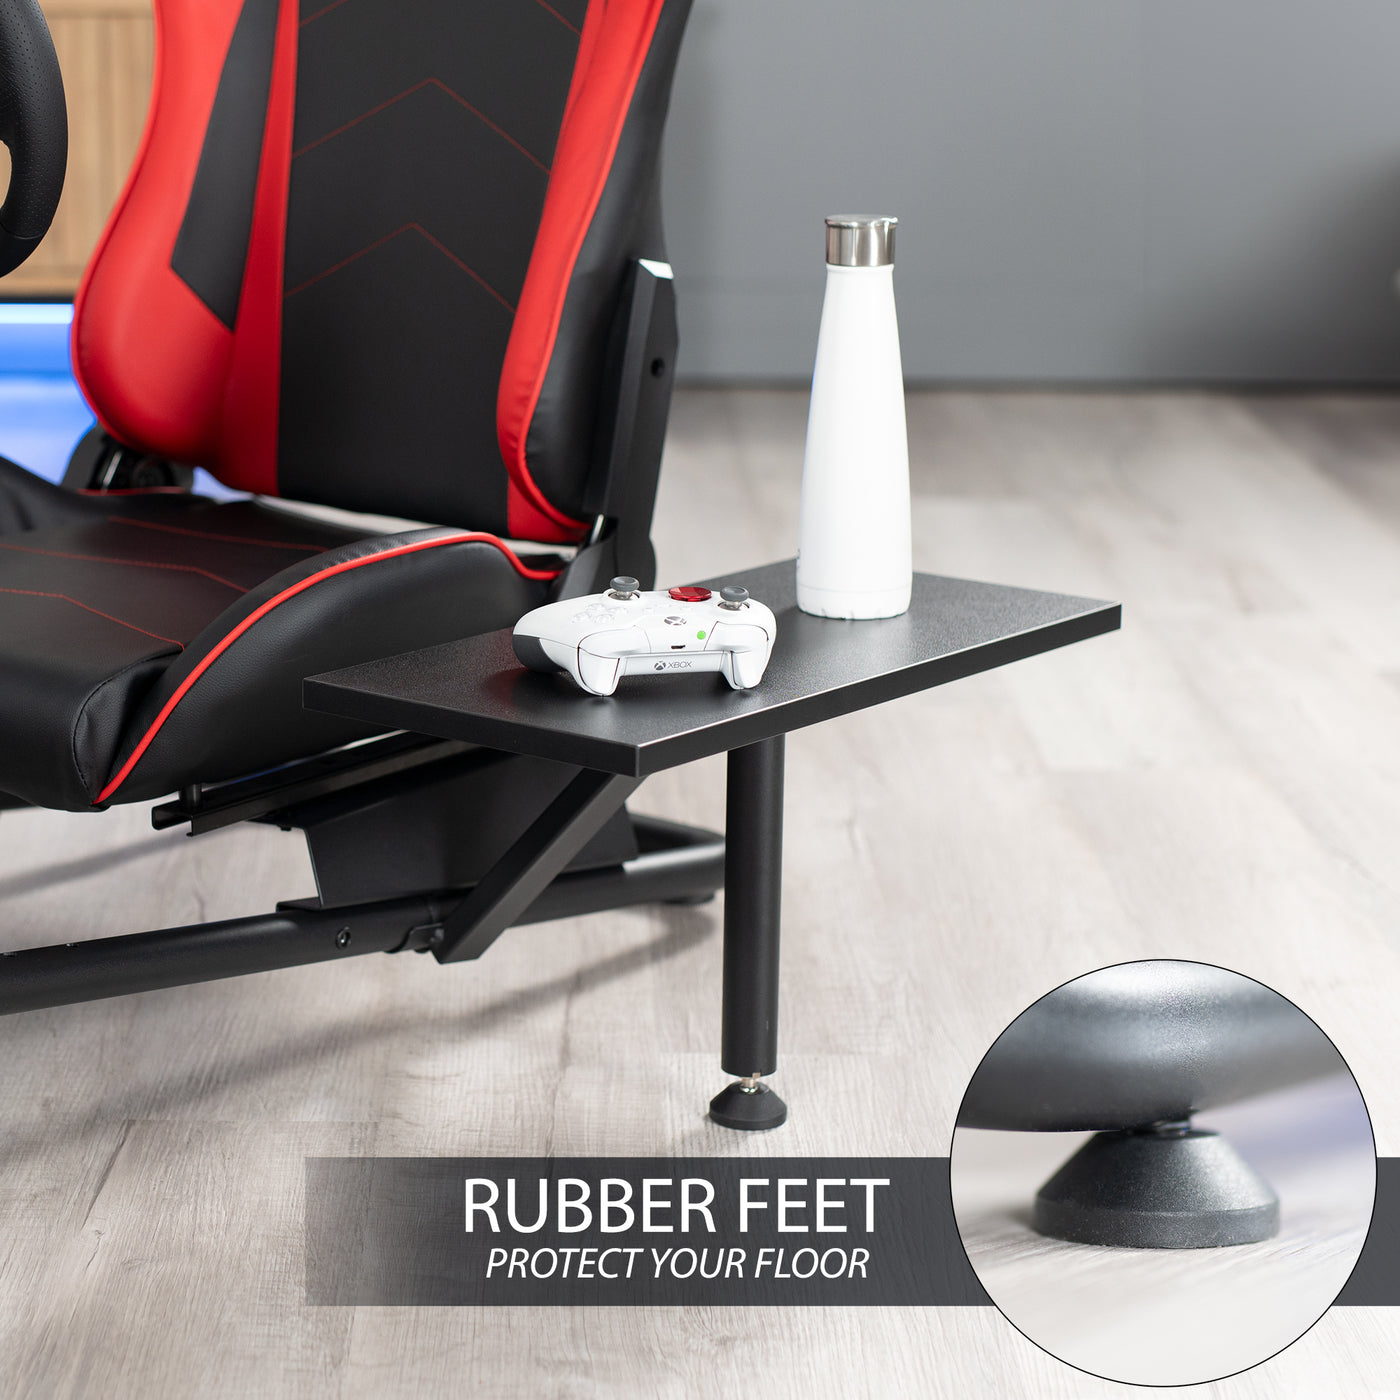 Racing simulator cockpit gaming chair with PC shelf and side shelf.